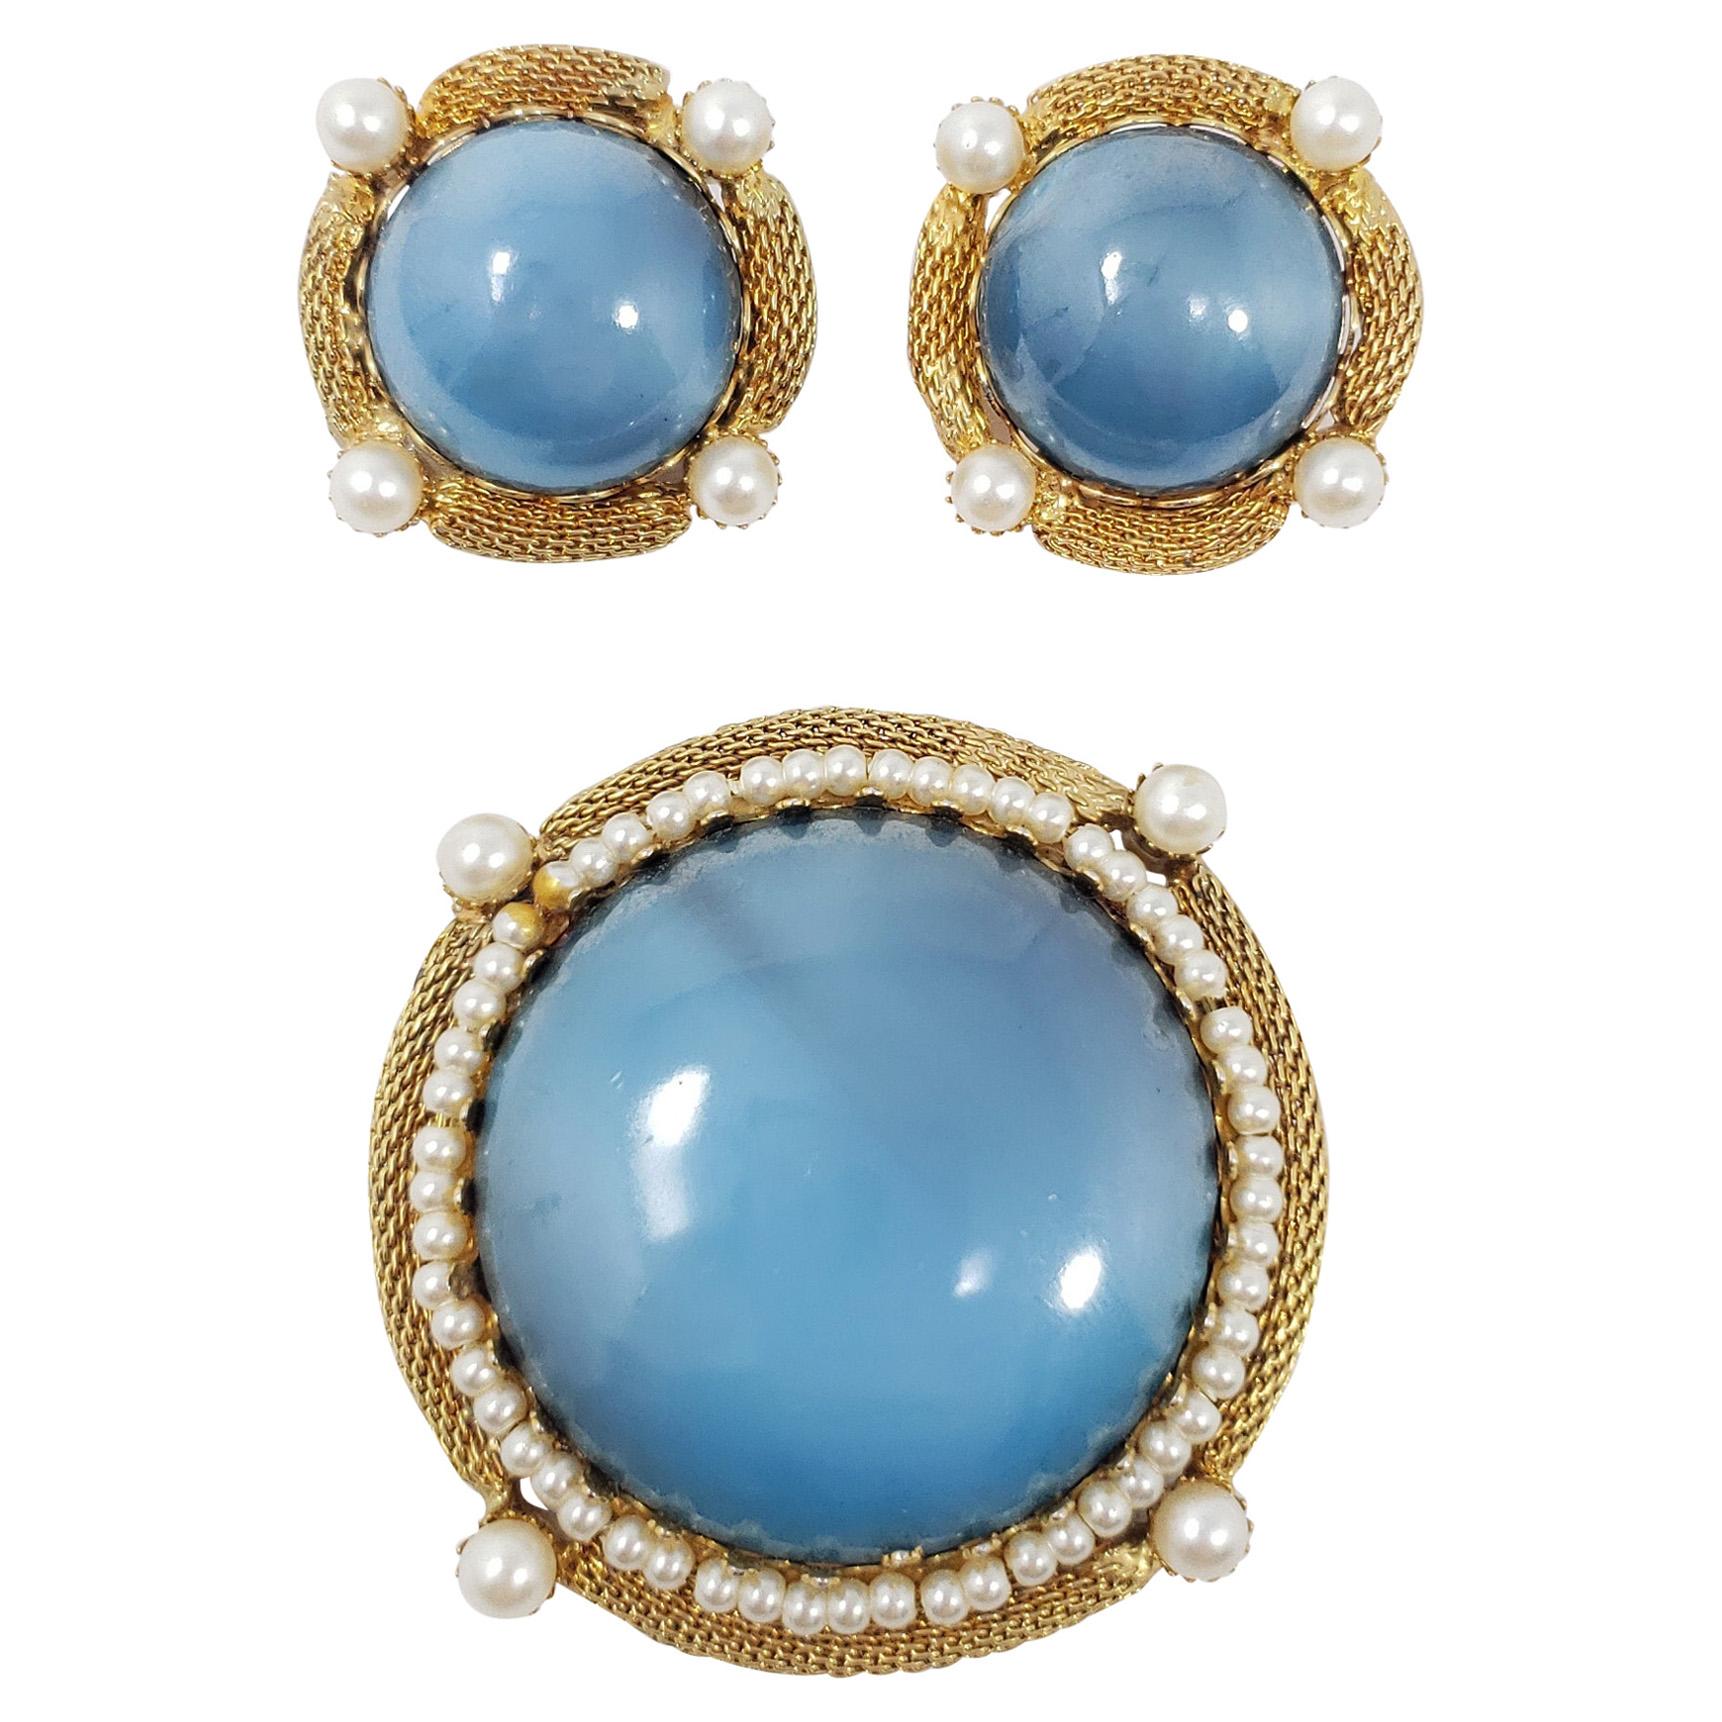 Vintage Gold Pin Brooch and Clip on Earrings Set, Faux Larimar Cabochons